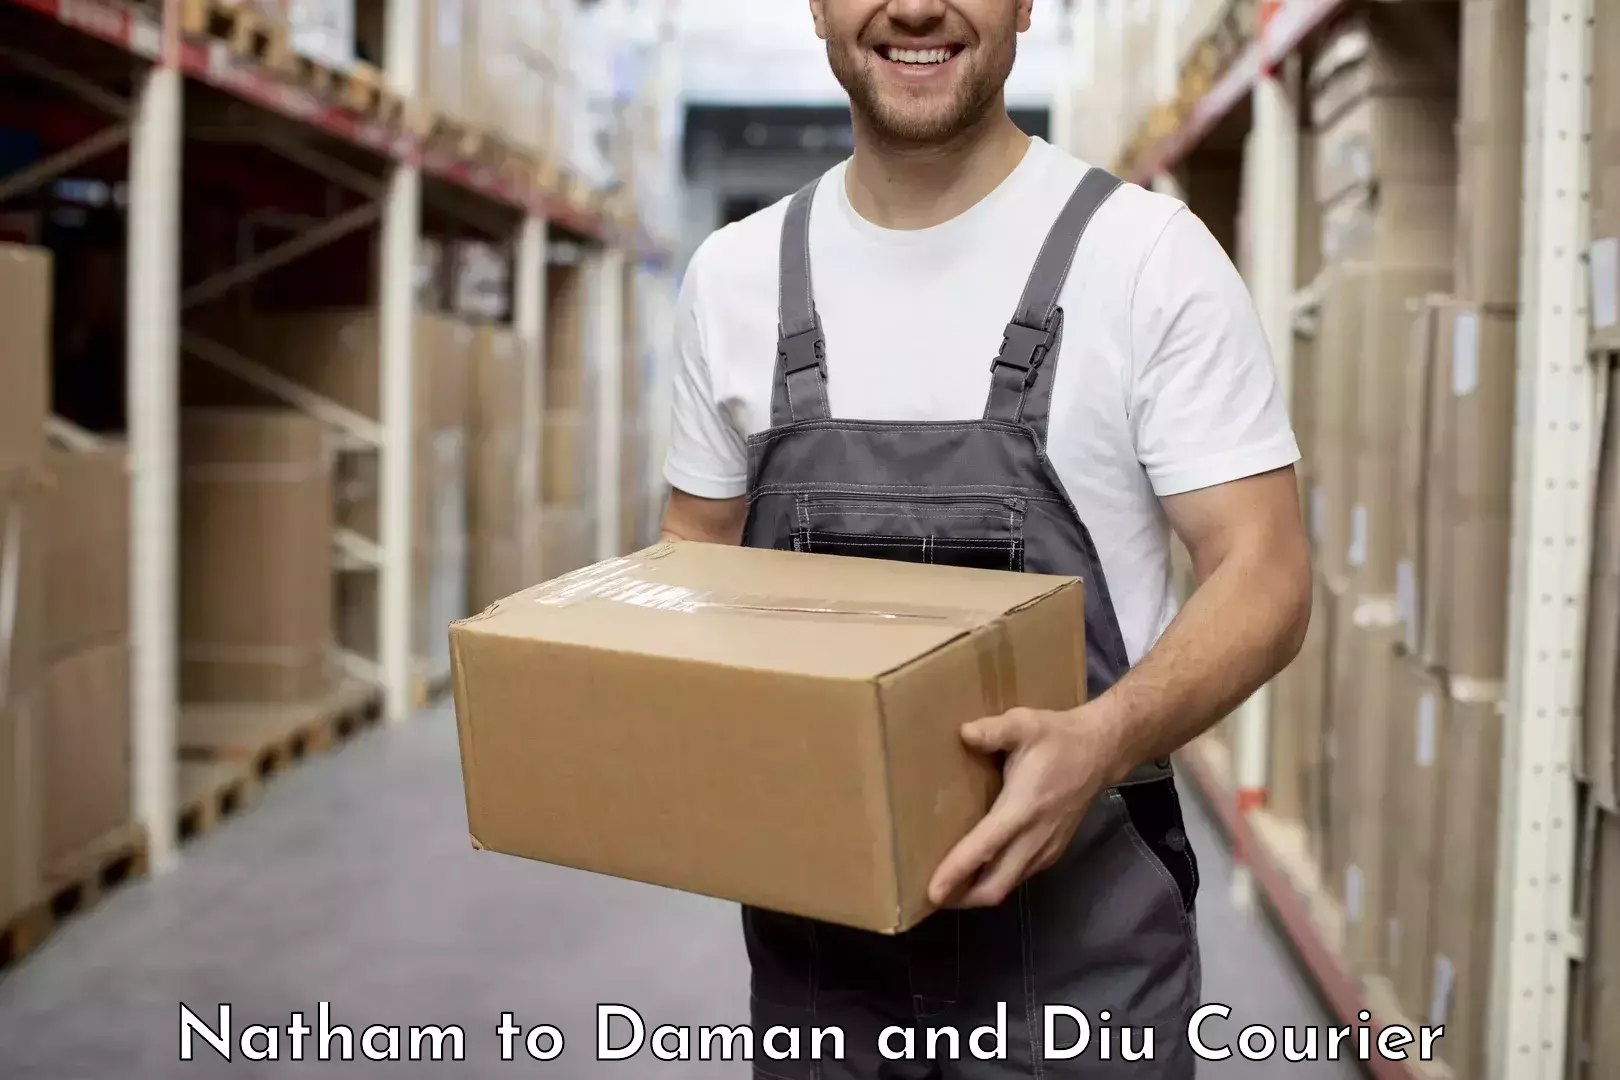 Sustainable courier practices Natham to Daman and Diu